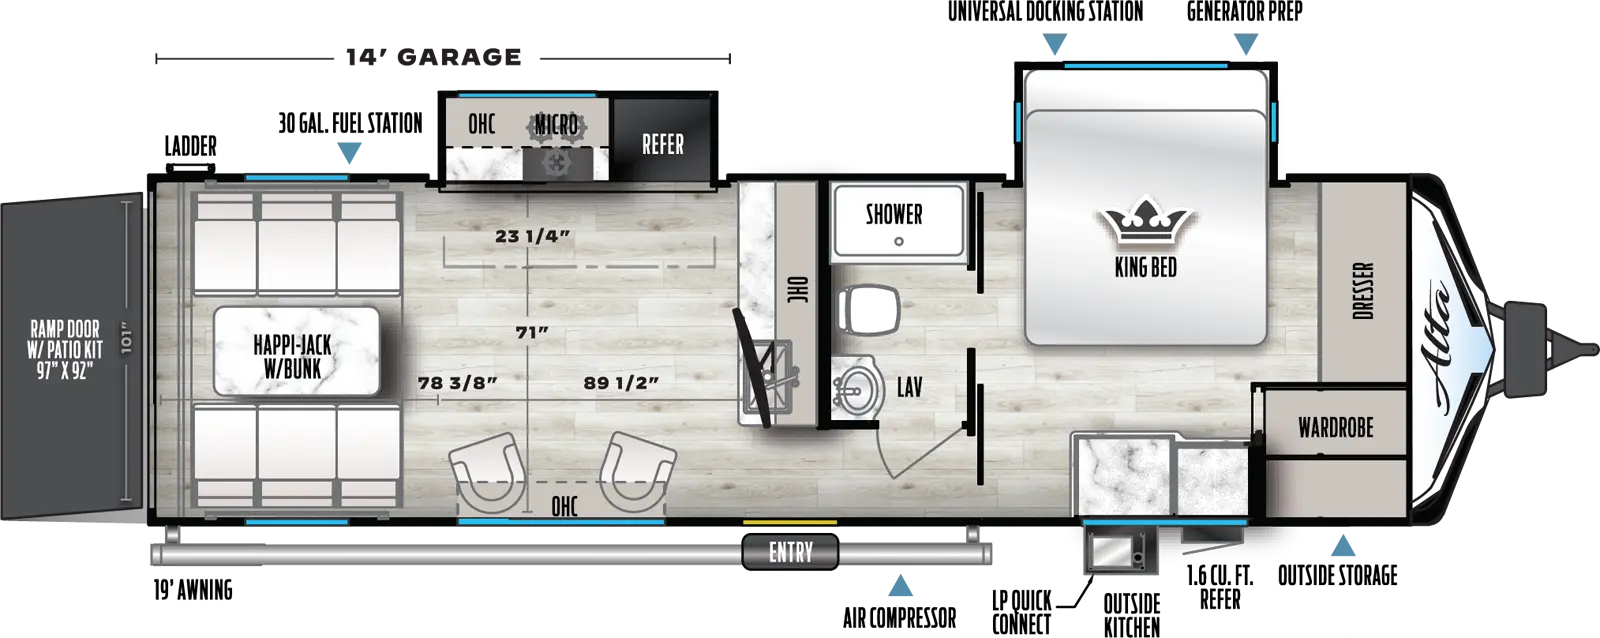 The 2870KTH has two slideouts and one entry door. Exterior features include an LP quick connect, outside kitchen, air compressor, 19 foot awning, outside storage, ladder, 30 gallon fuel station, universal docking station, and generator prep. Interior layout front to back: front dresser and wardrobe; off-door side king bed slideout; off-door side aisle pass through full bathroom; kitchen counter with sink and overhead cabinet with TV along inner wall; off-door side slideout with refrigerator, microwave, oven, and overhead cabinet; door side entry, chairs, and overhead cabinet; rear happi-jack with bunk; rear ramp door with patio kit. Garage dimensions: 14 foot garage; 101 inches wide; 78 3/8 inches from rear to kitchen slideout; 89 1/2 inches from rear to sink counter; 71 inches from side to side; 23 1/4 inches length of kitchen slideout; 97 inch x 92 inch rear ramp door. 